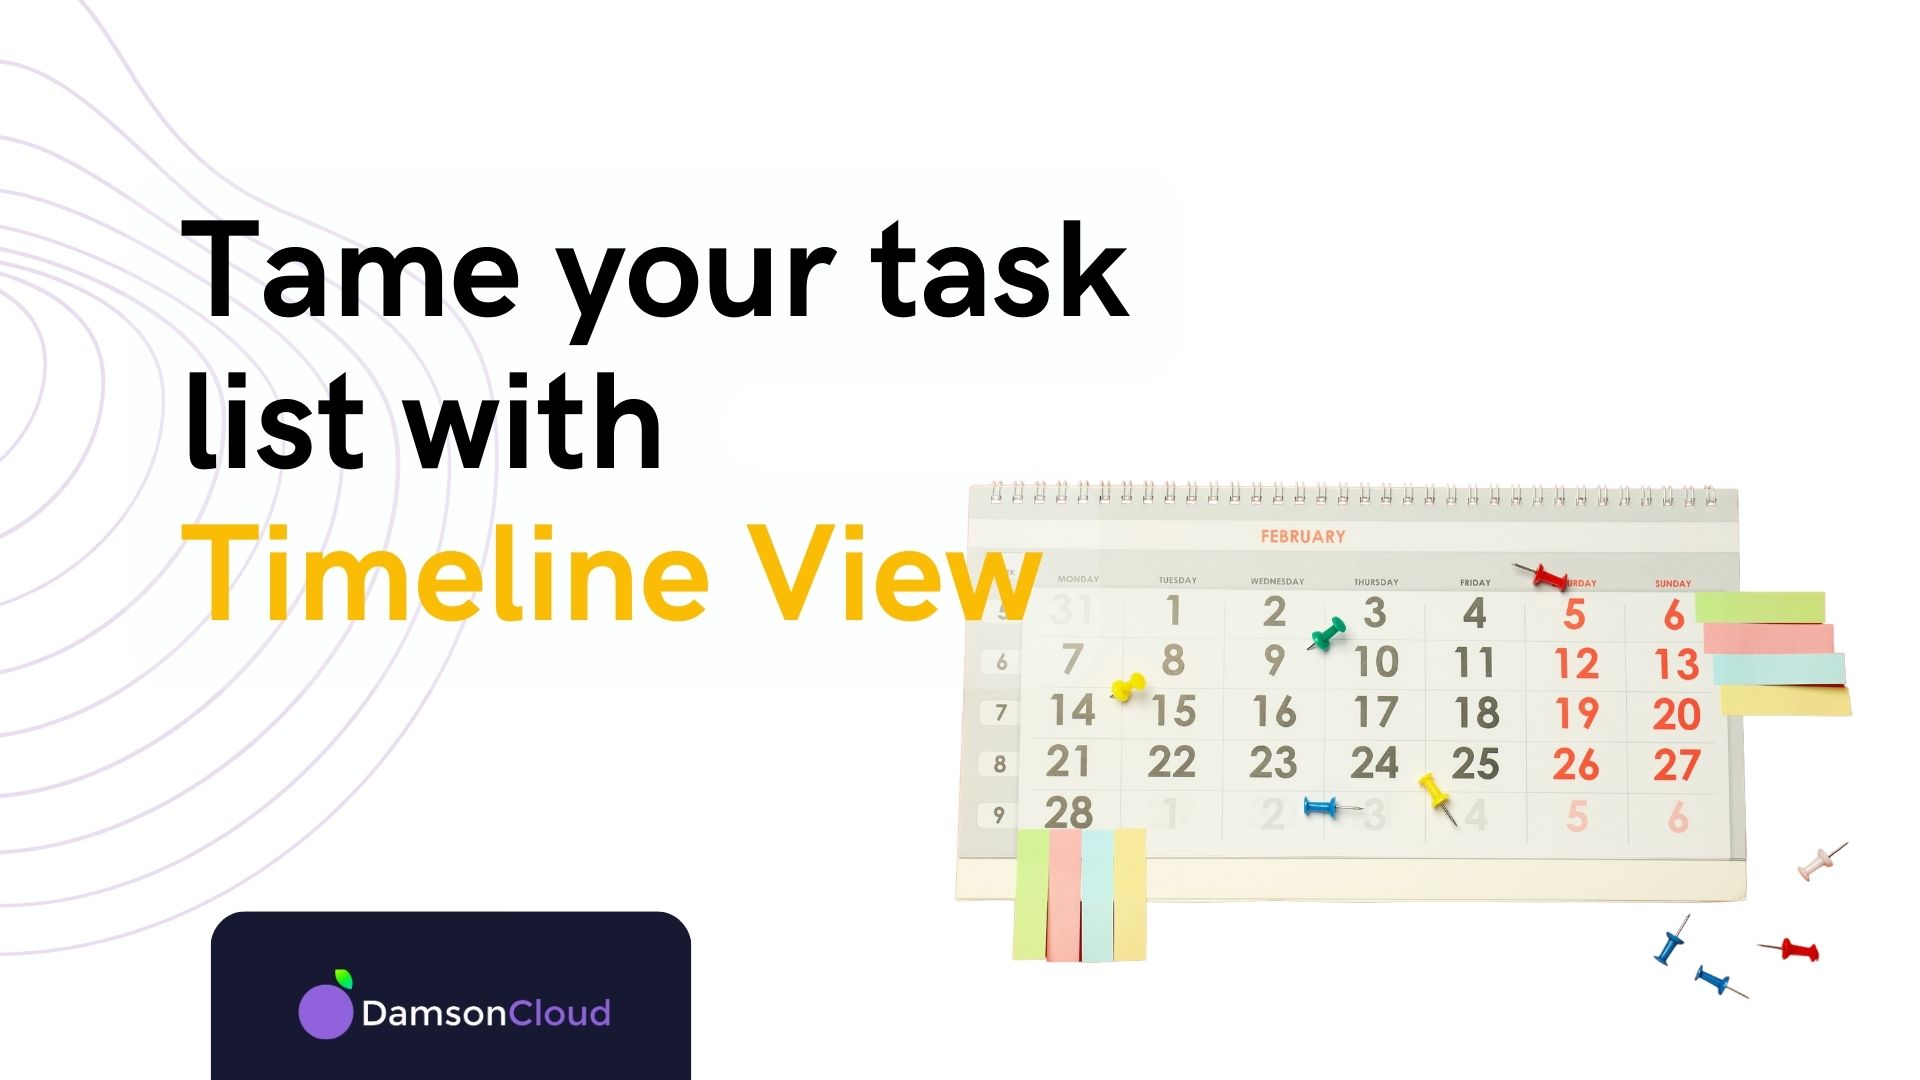 How to Use Timeline View in Google Sheets